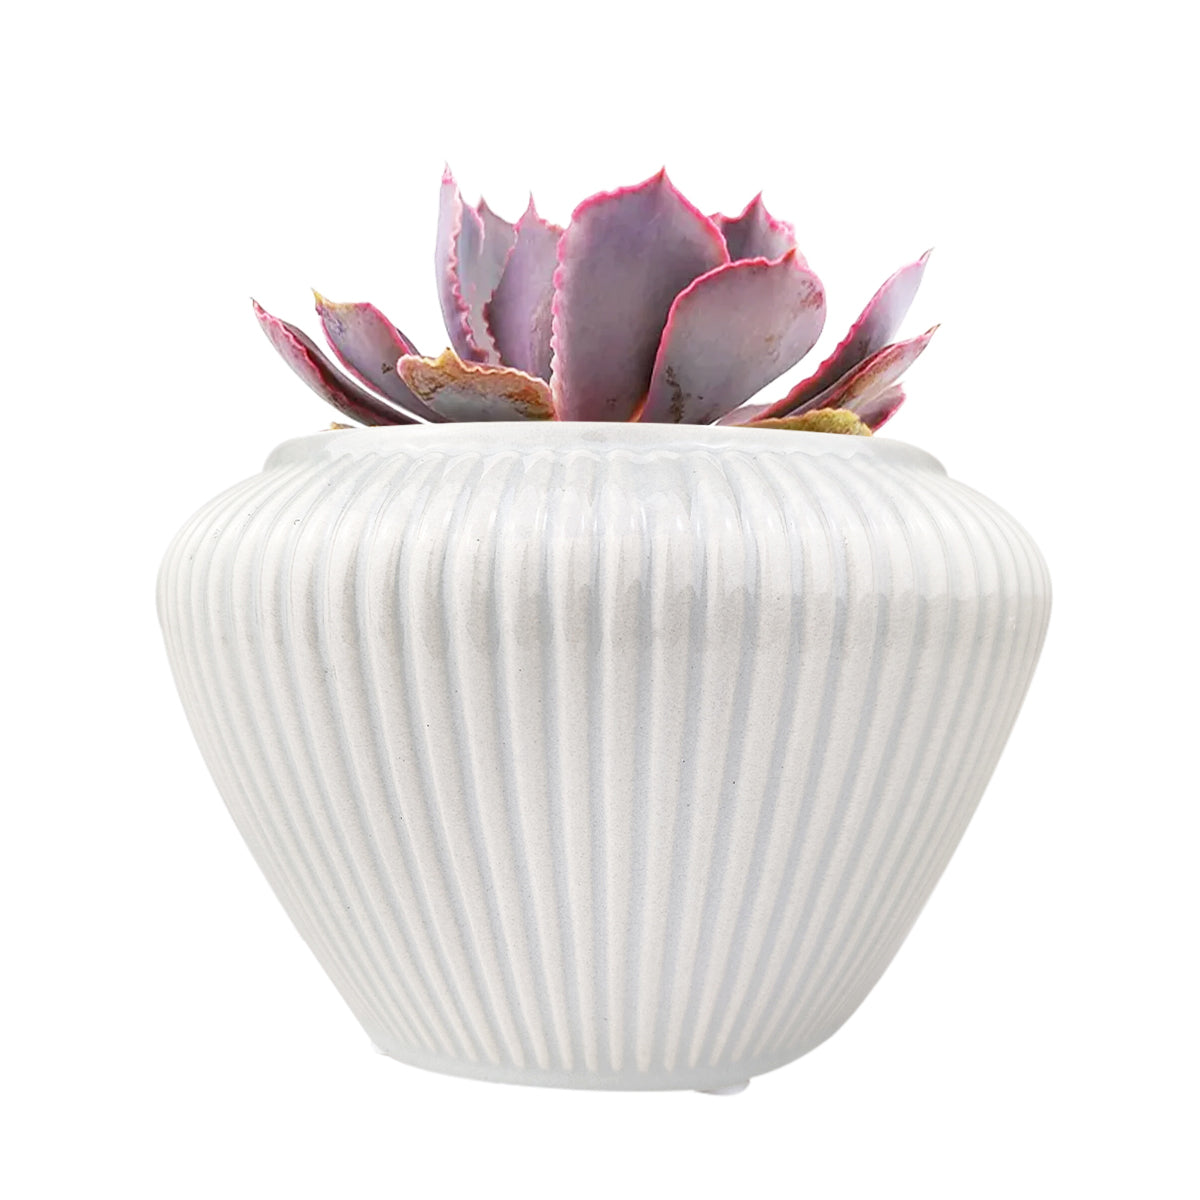 6 inch Geometric Striped Ceramic Pot, Jar Shaped Planter, large pots for succulents and cacti